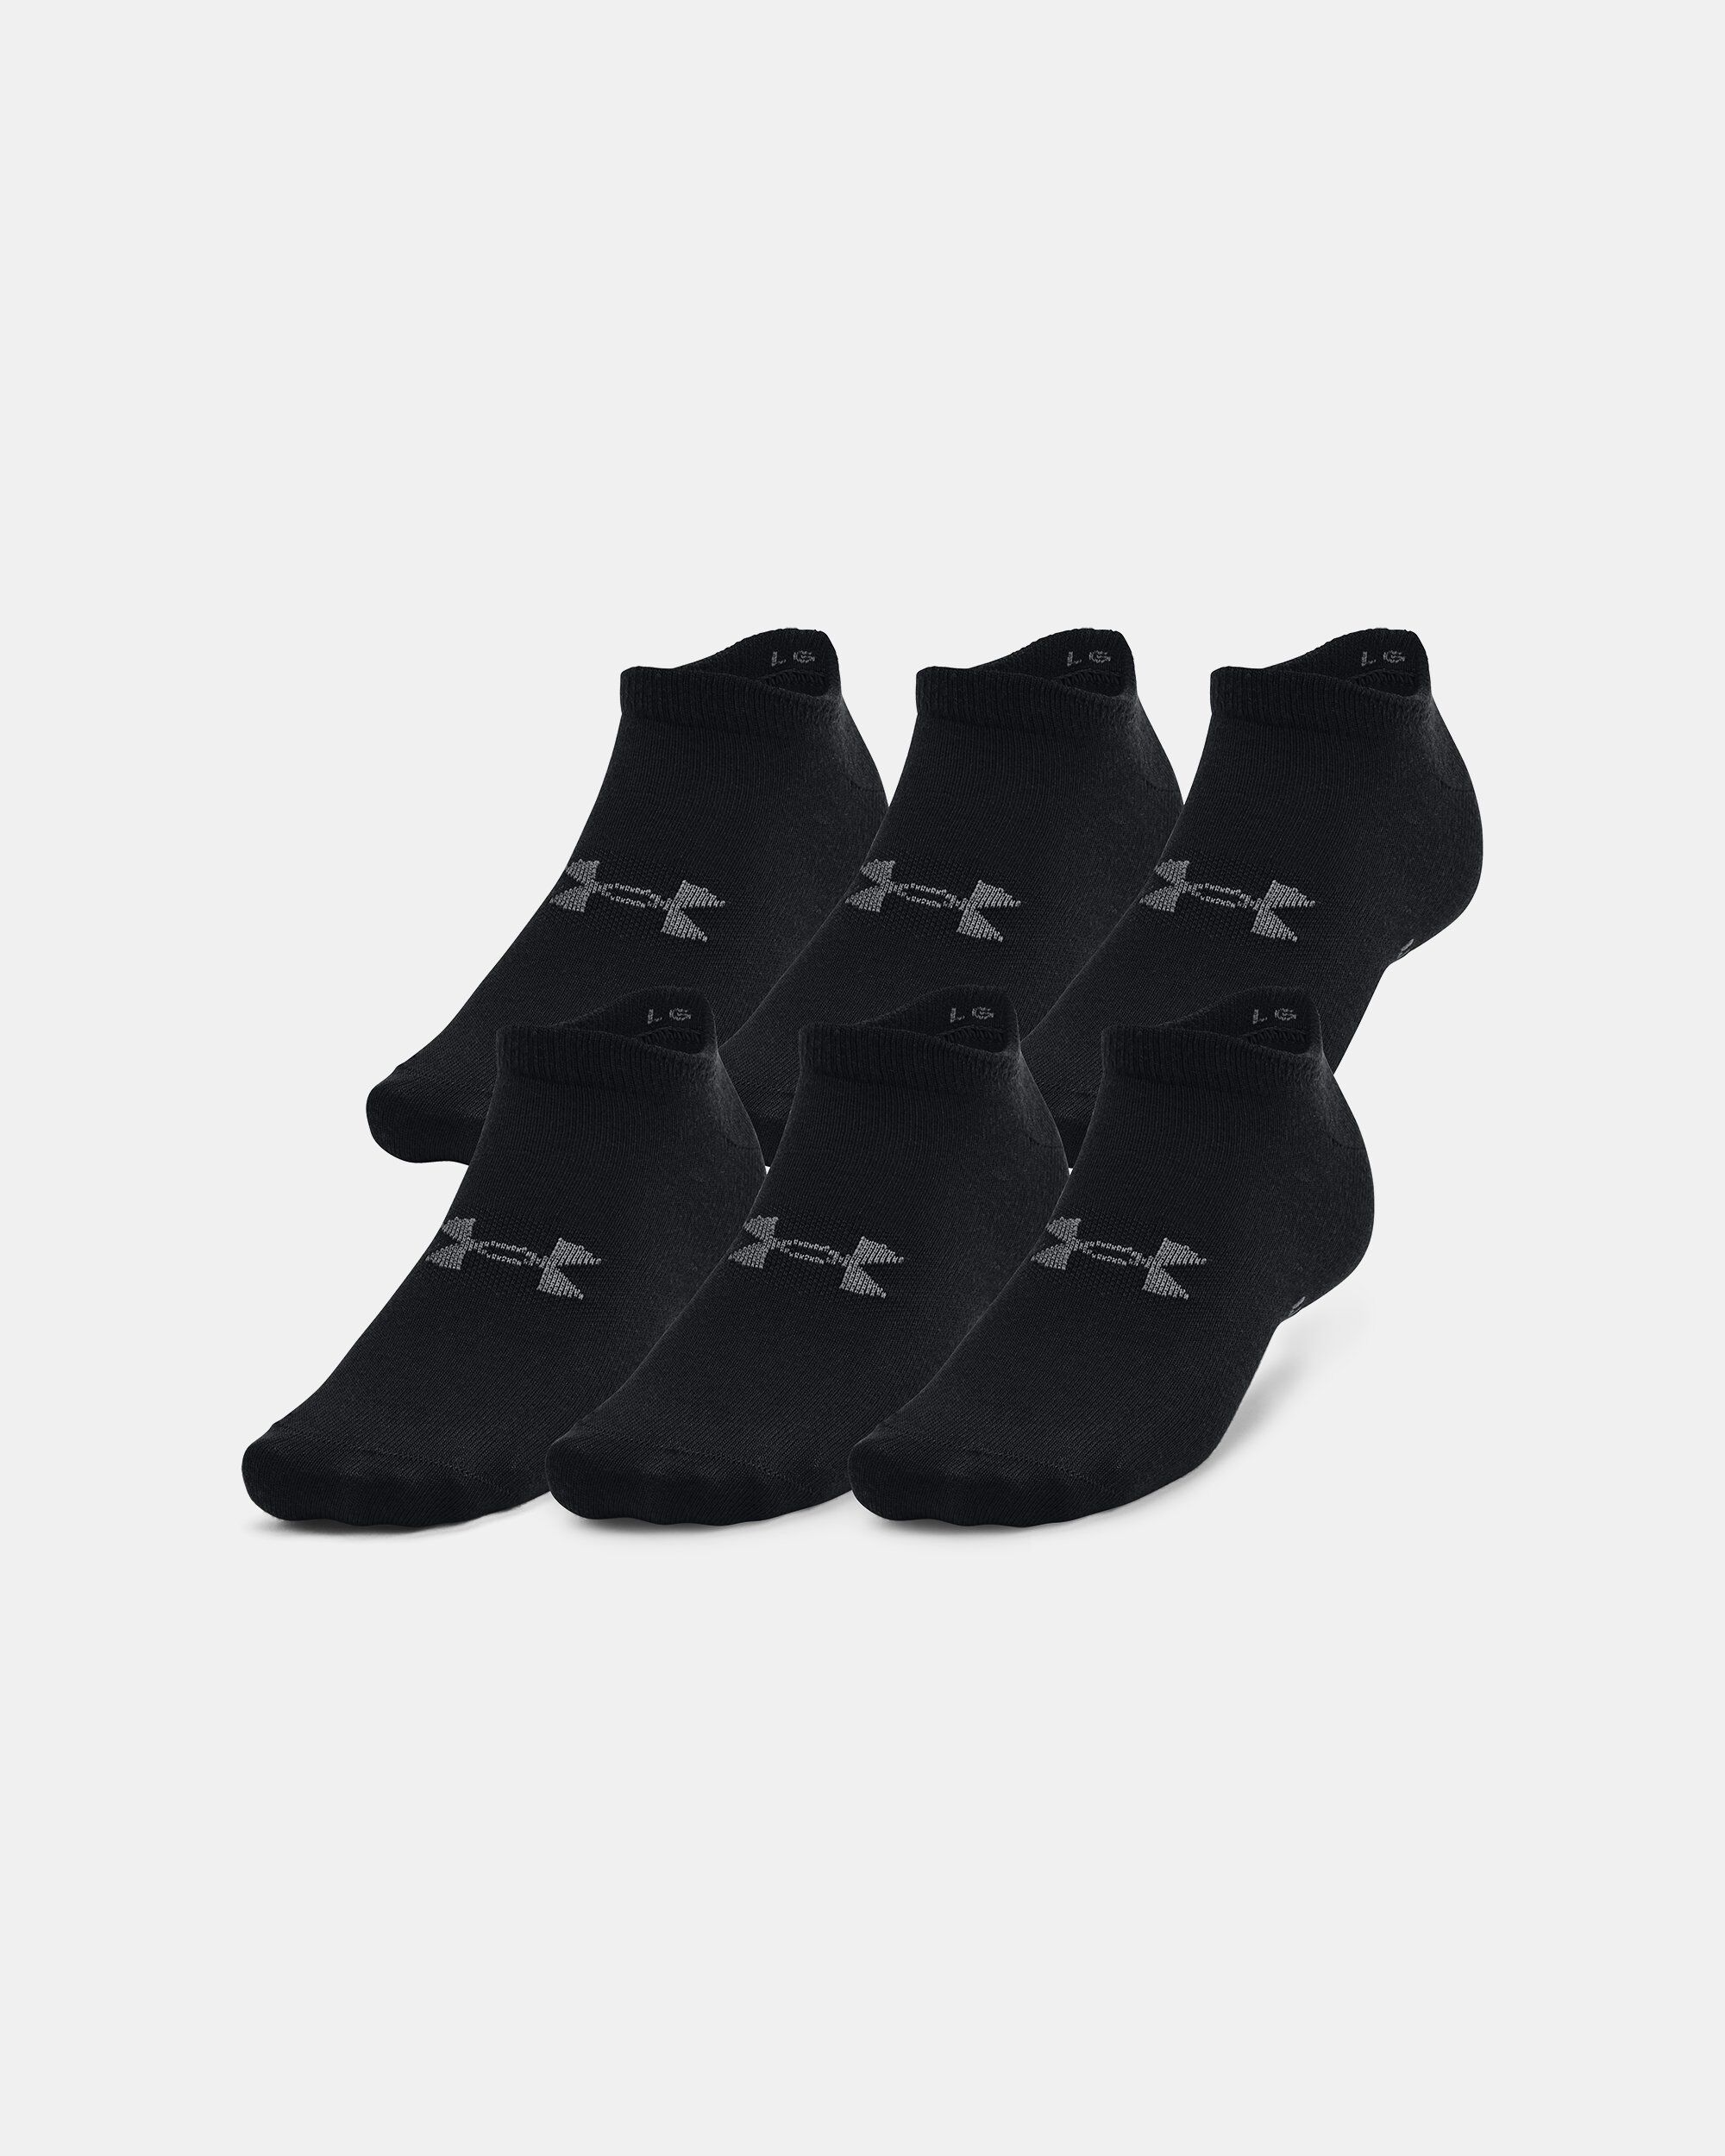 Under Armour HeatGear Performance 6 Pair No Show Socks White Size Large for sale online 